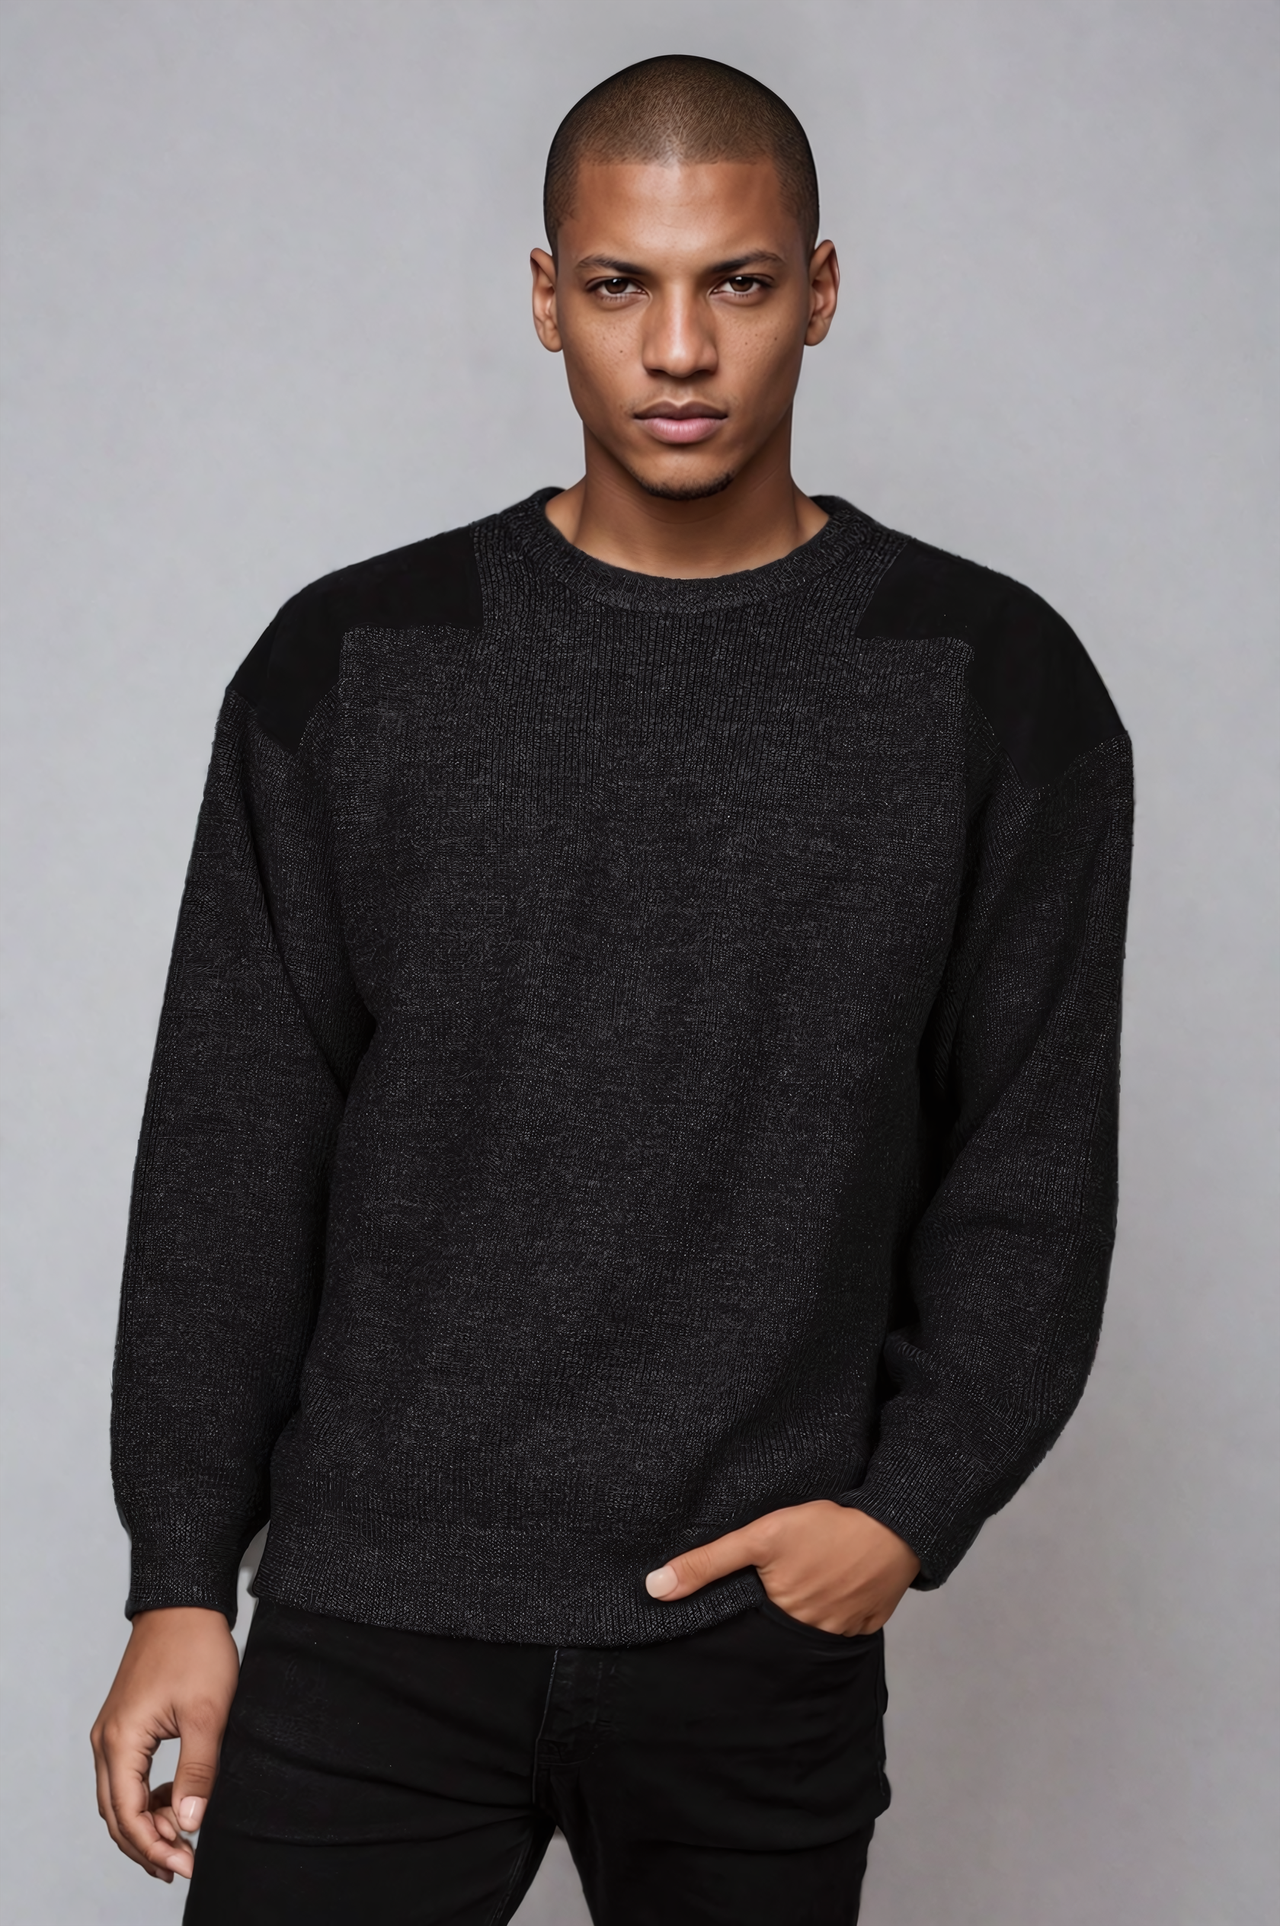 Ansett Wool Charcoal Jumper With Black Elbow And Shoulder Patches